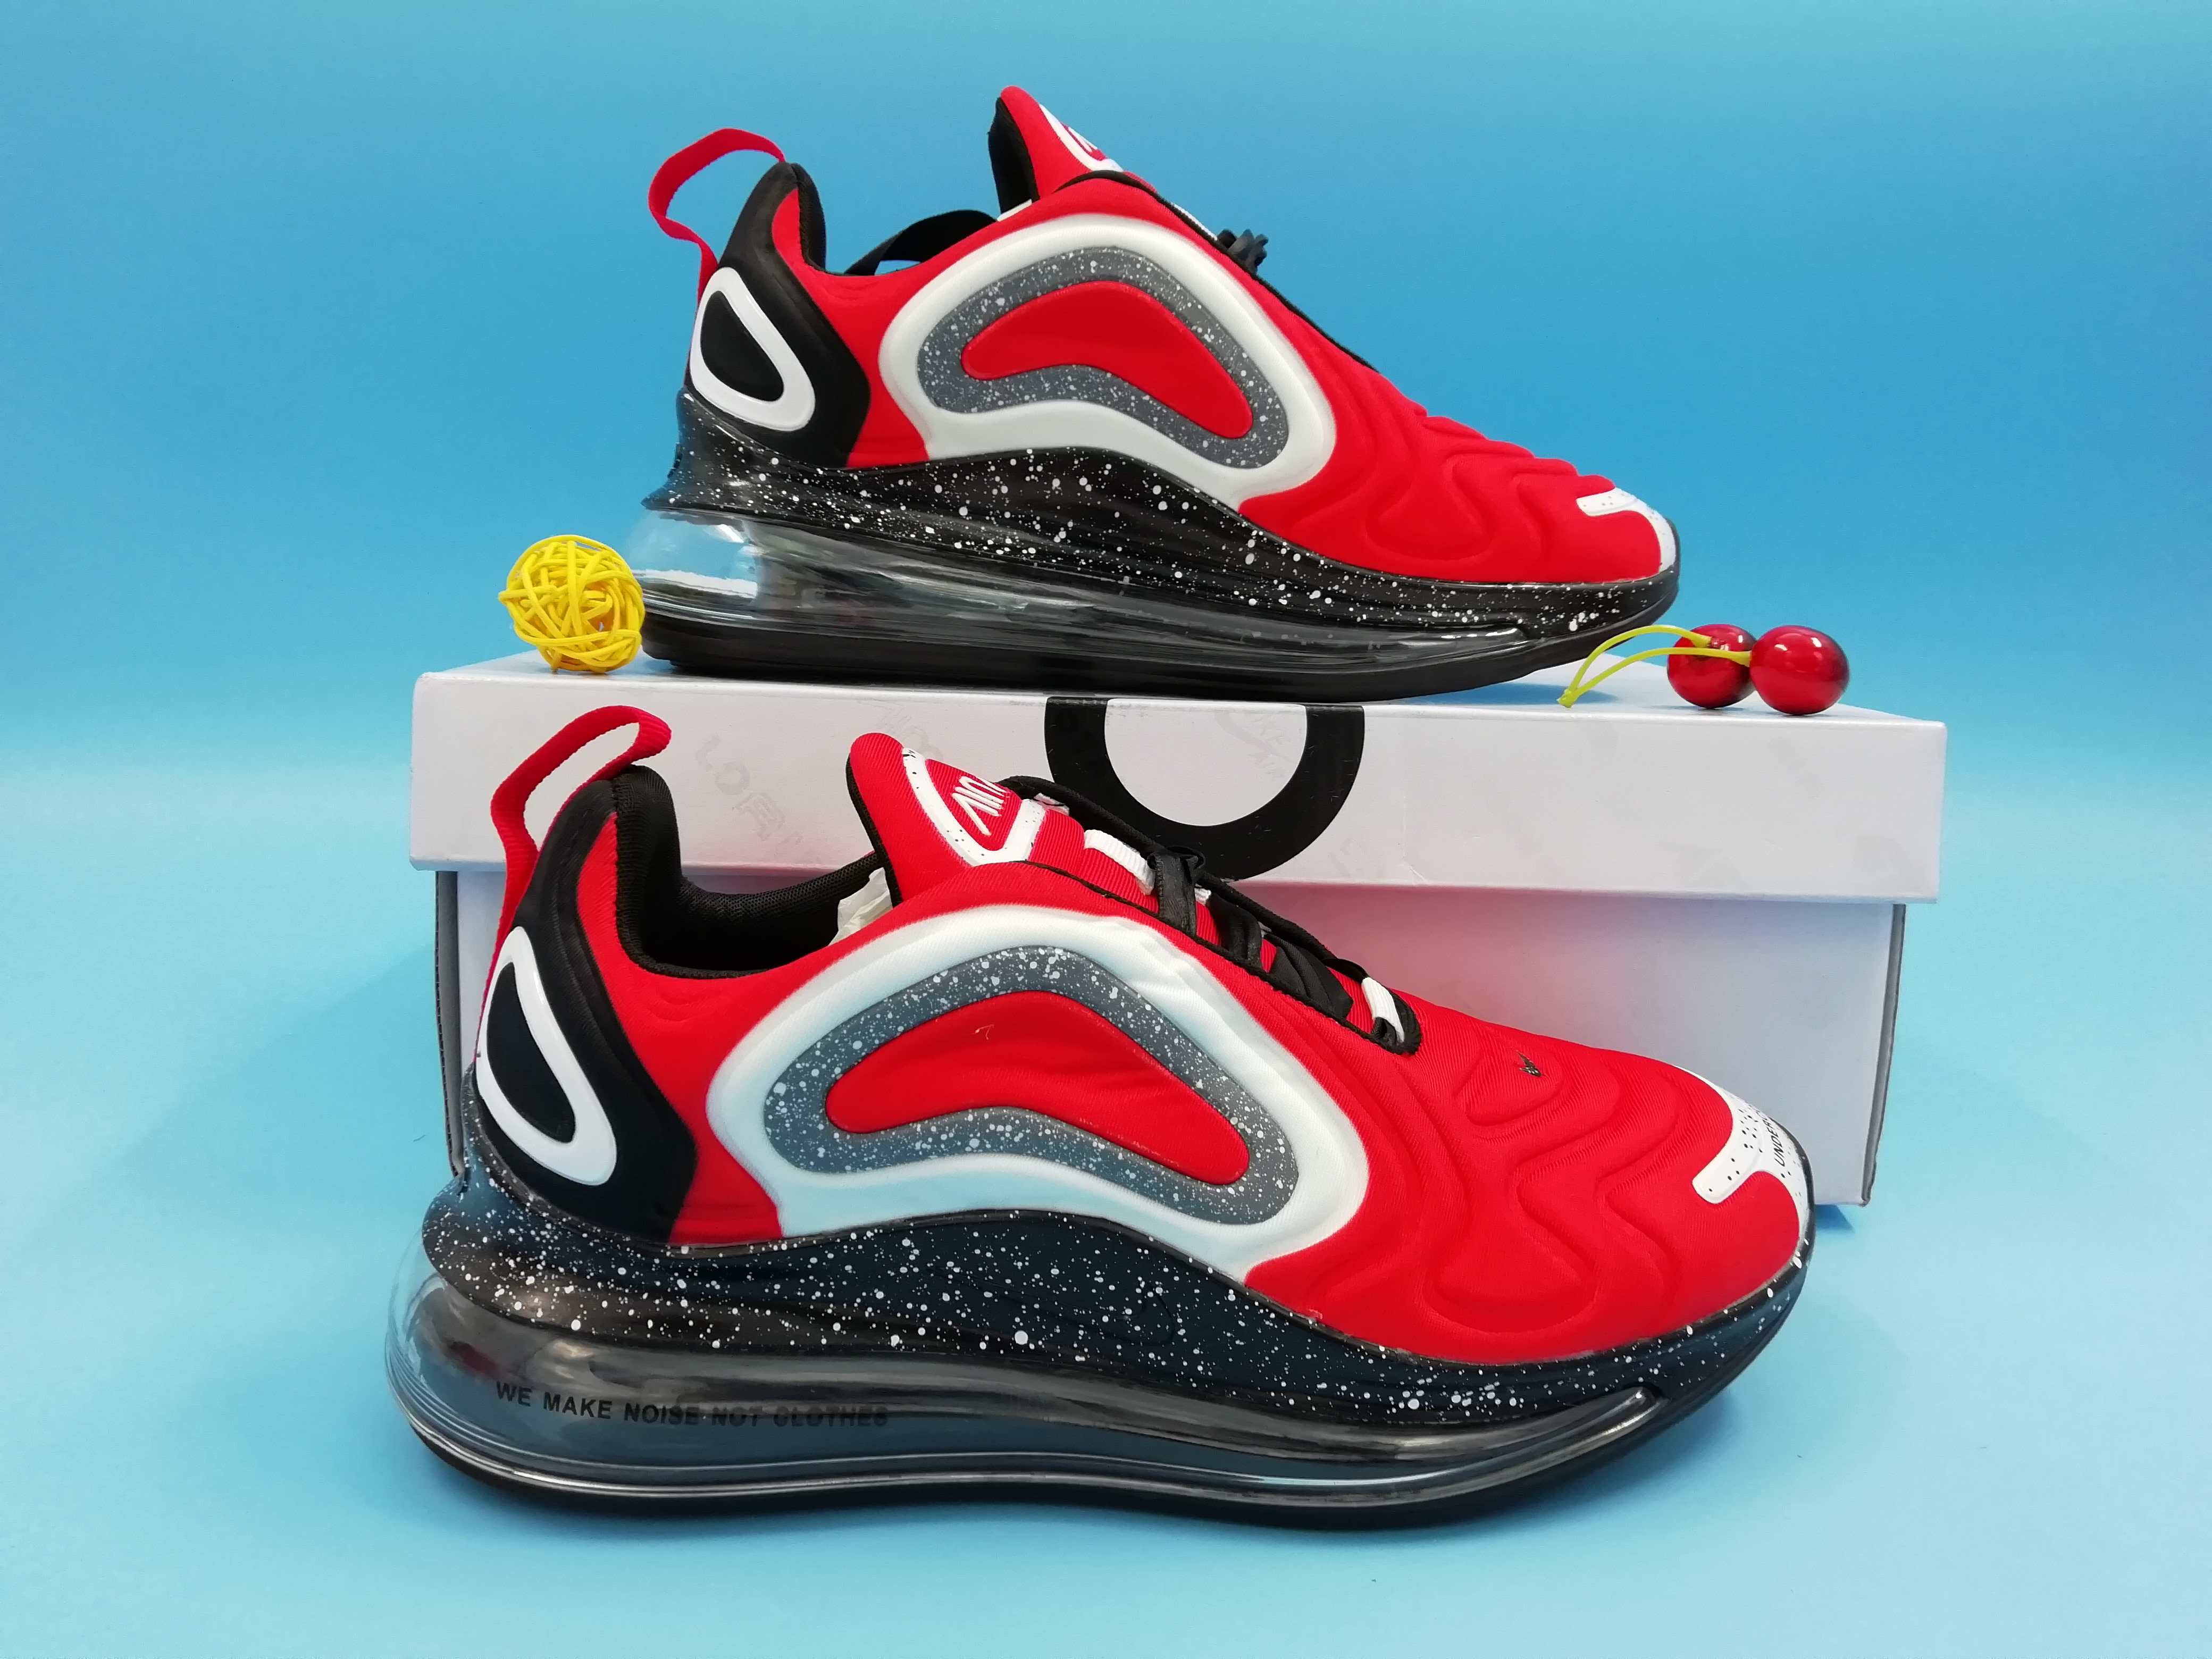 Off-white Nike Air Max 720 Hot Red White Black Women Shoes